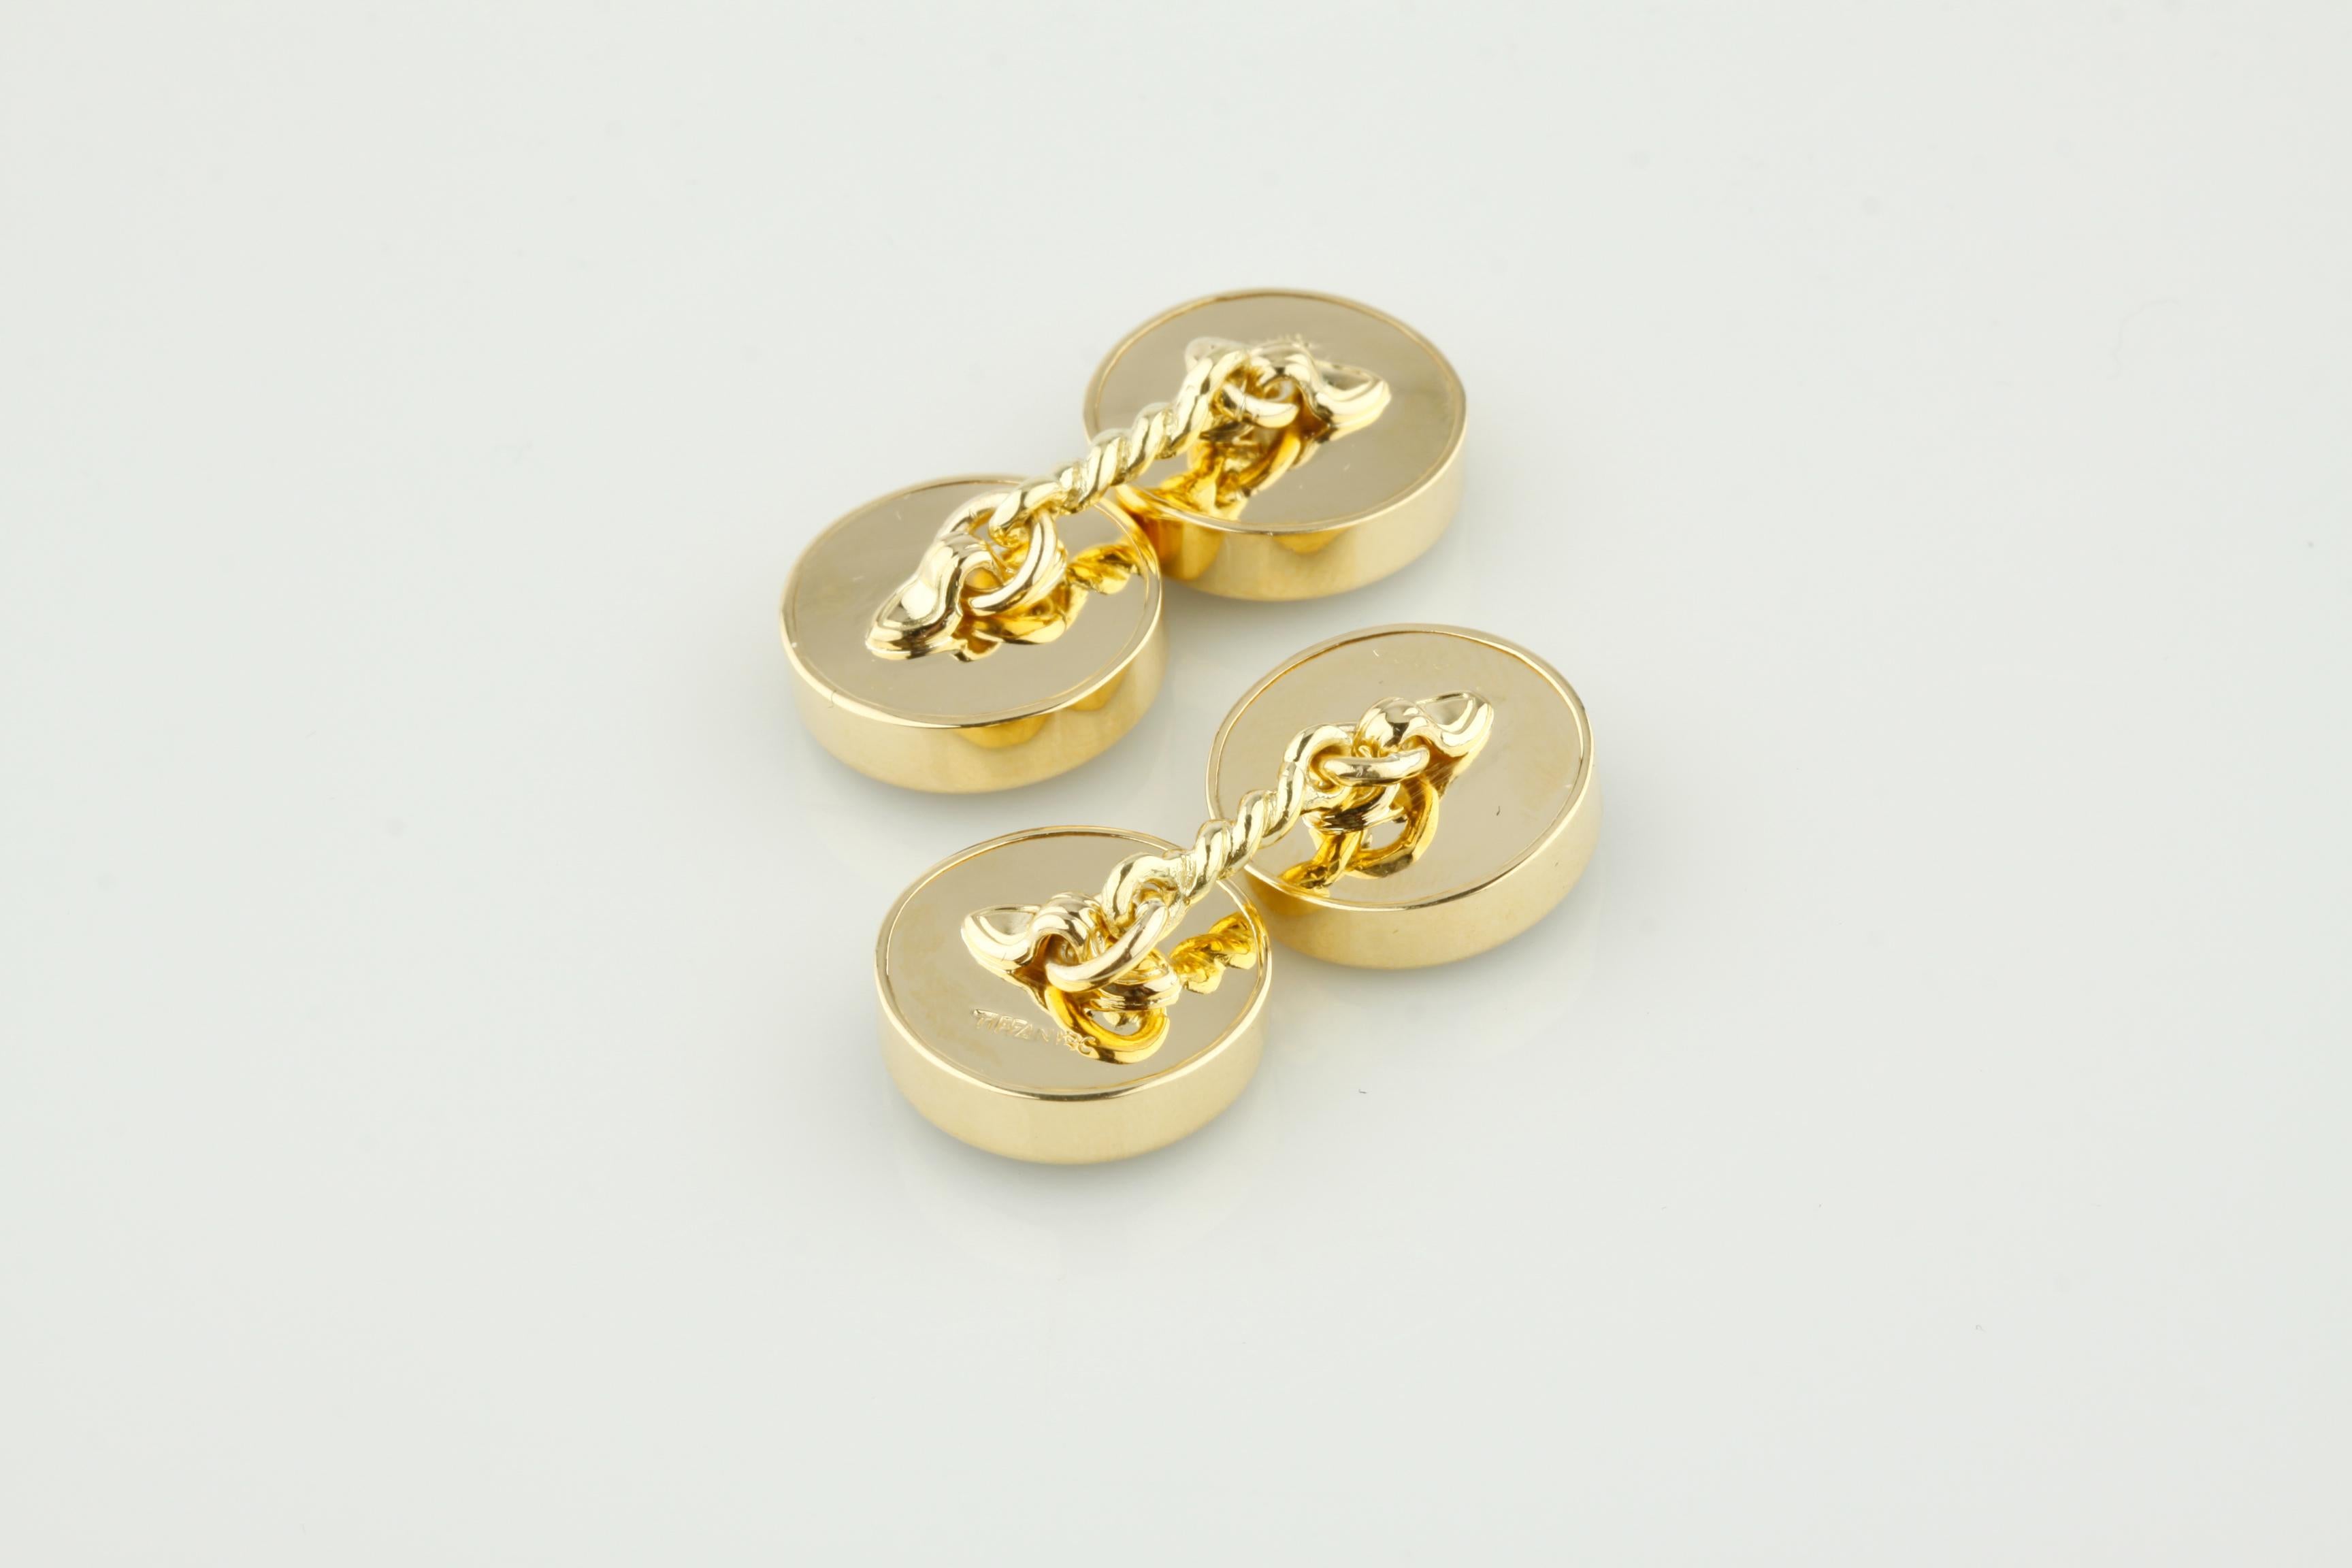 Gorgeous Vintage Cufflinks by Tiffany & Co.
From the 1950s
18k Yellow Gold w/ Onyx 